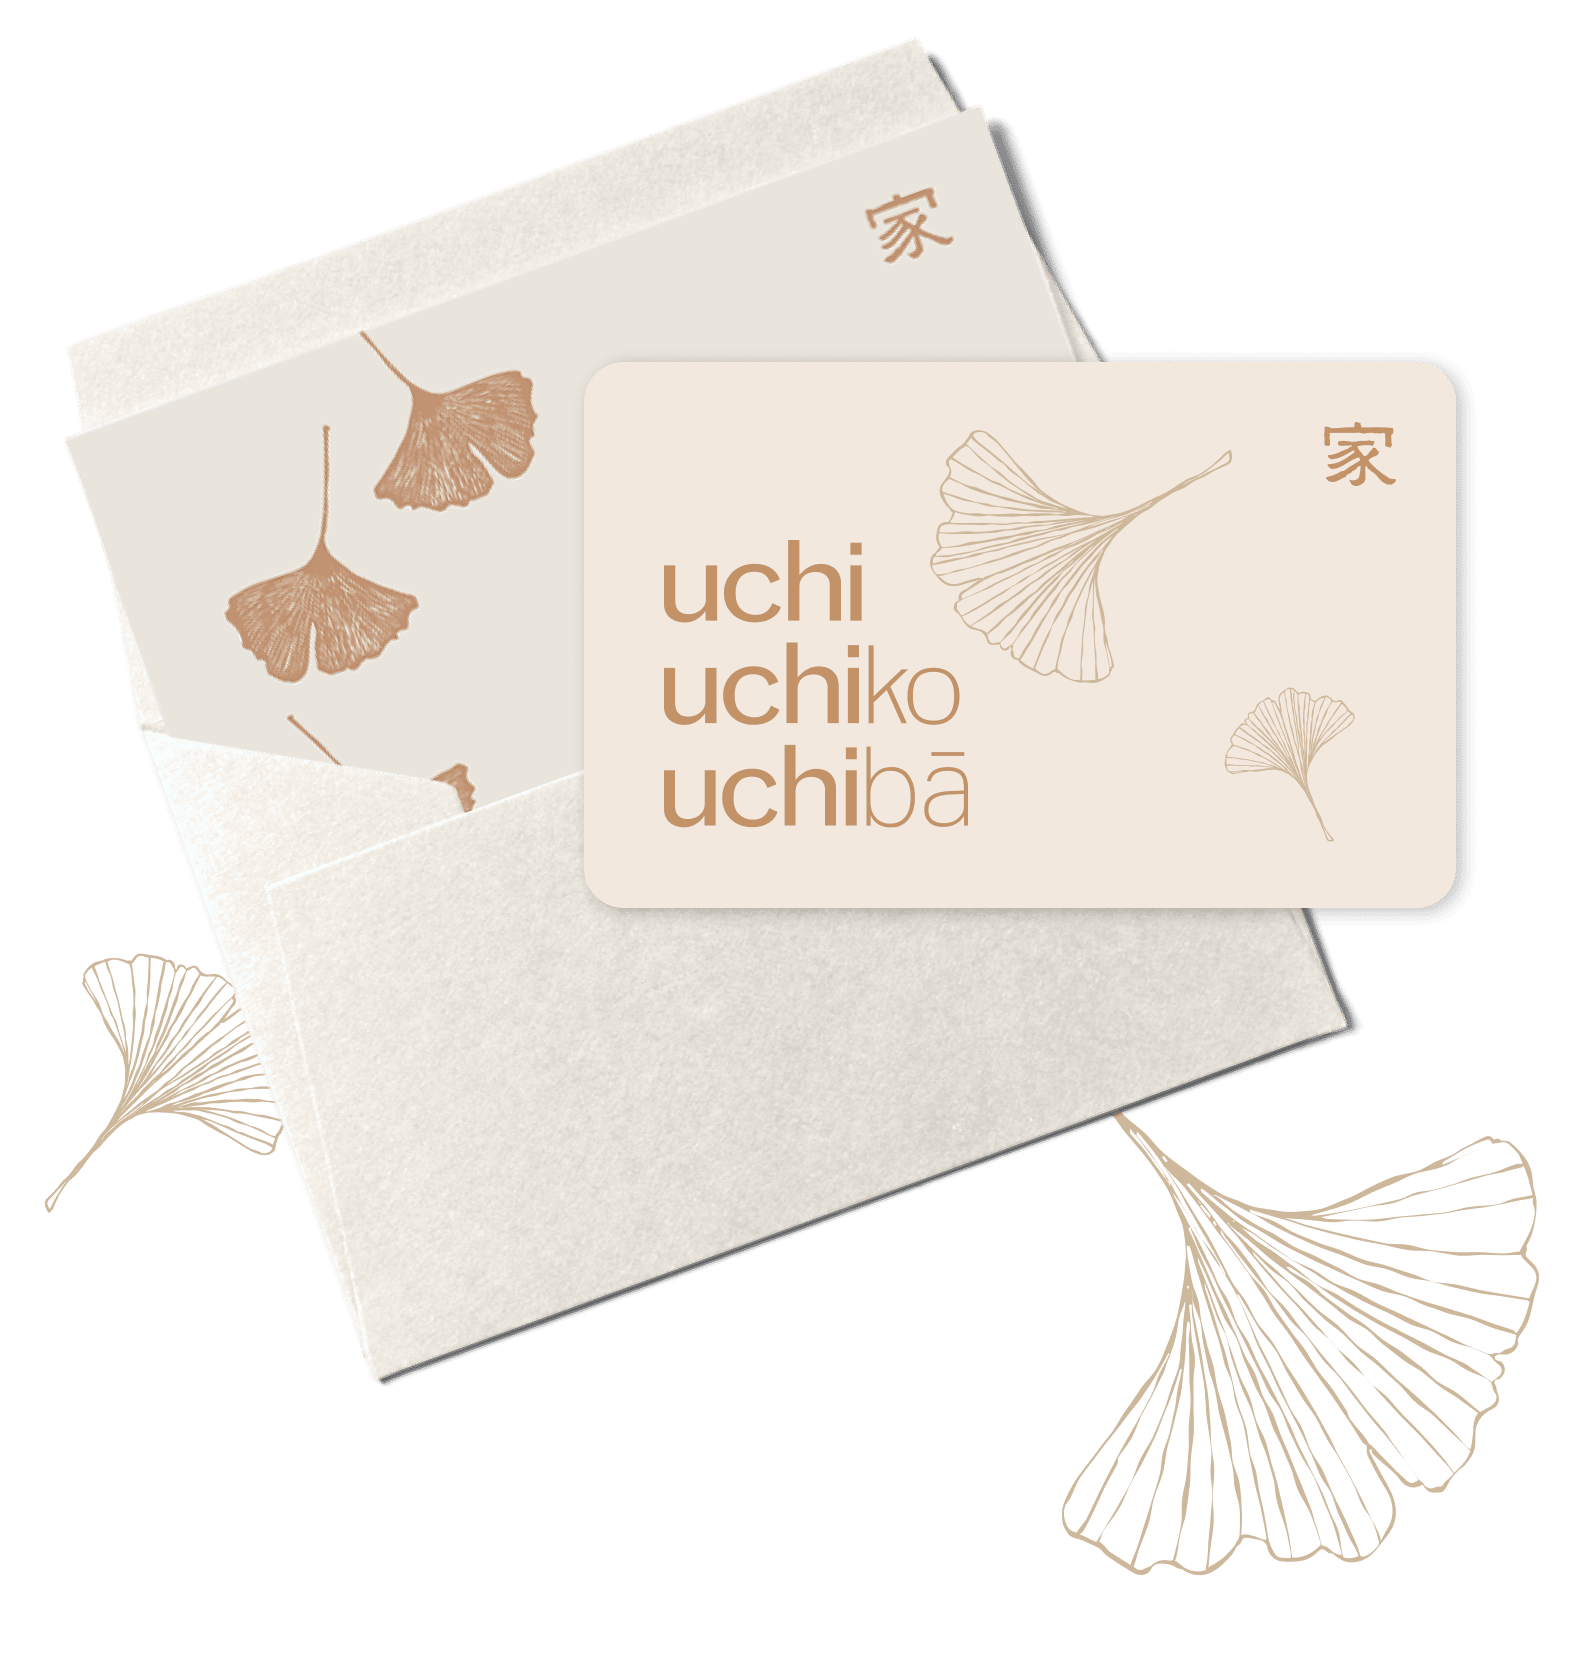 An envelope containing a gift card that can be redeemed at Uchi, Uchiko, or Uchiba.